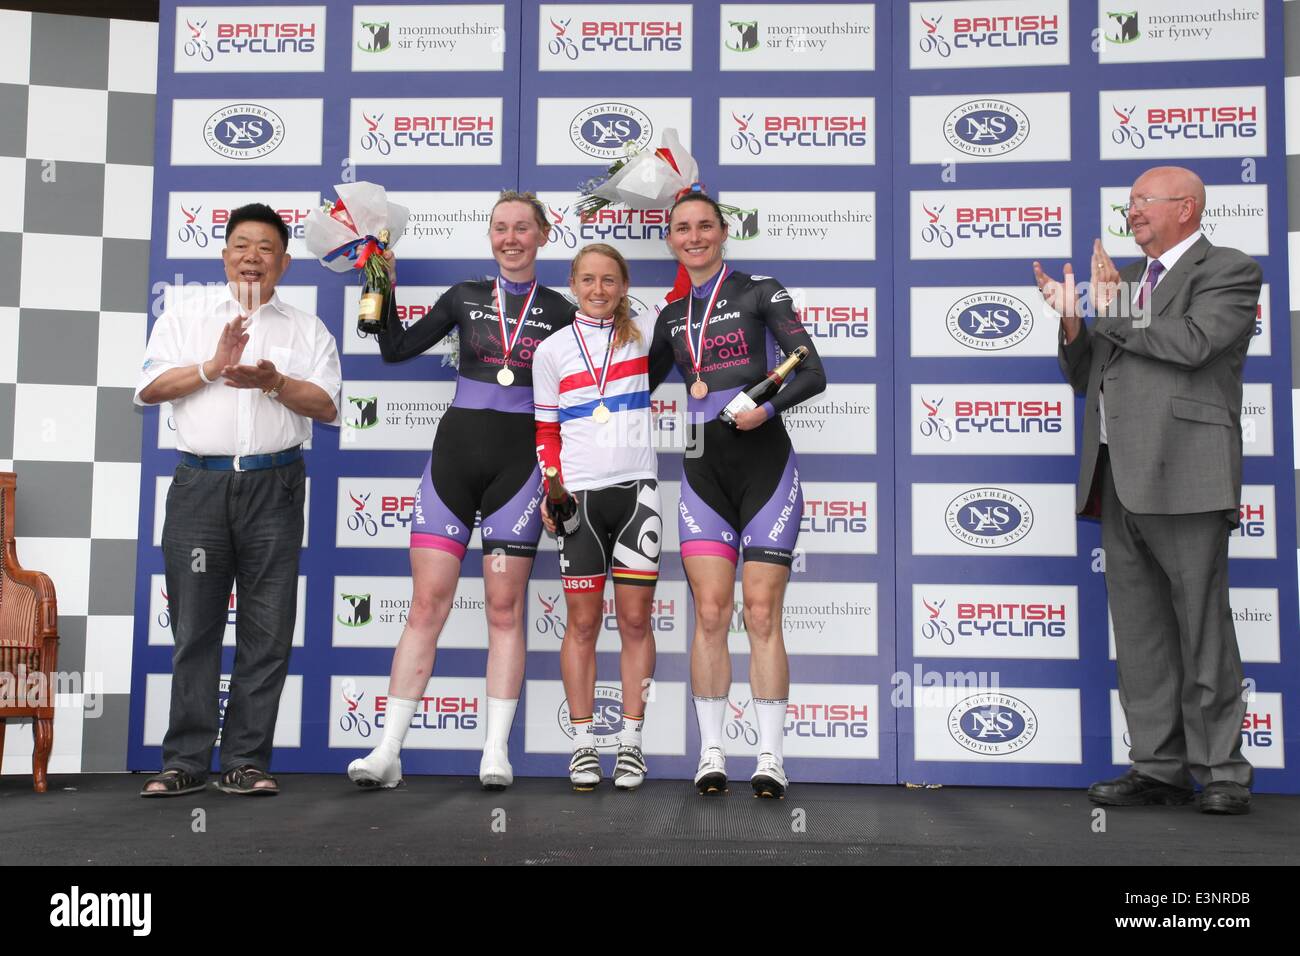 Celtic Manor, Newport, Wales, UK. 26th June 2014. British National Time Trial Championships. Top 3 in the elite women's race. Won by Emma Pooley (centre), 2nd Katie Archibald (left) and 3rd Dame Sarah Storey (right) Credit:  Neville Styles/Alamy Live News Stock Photo